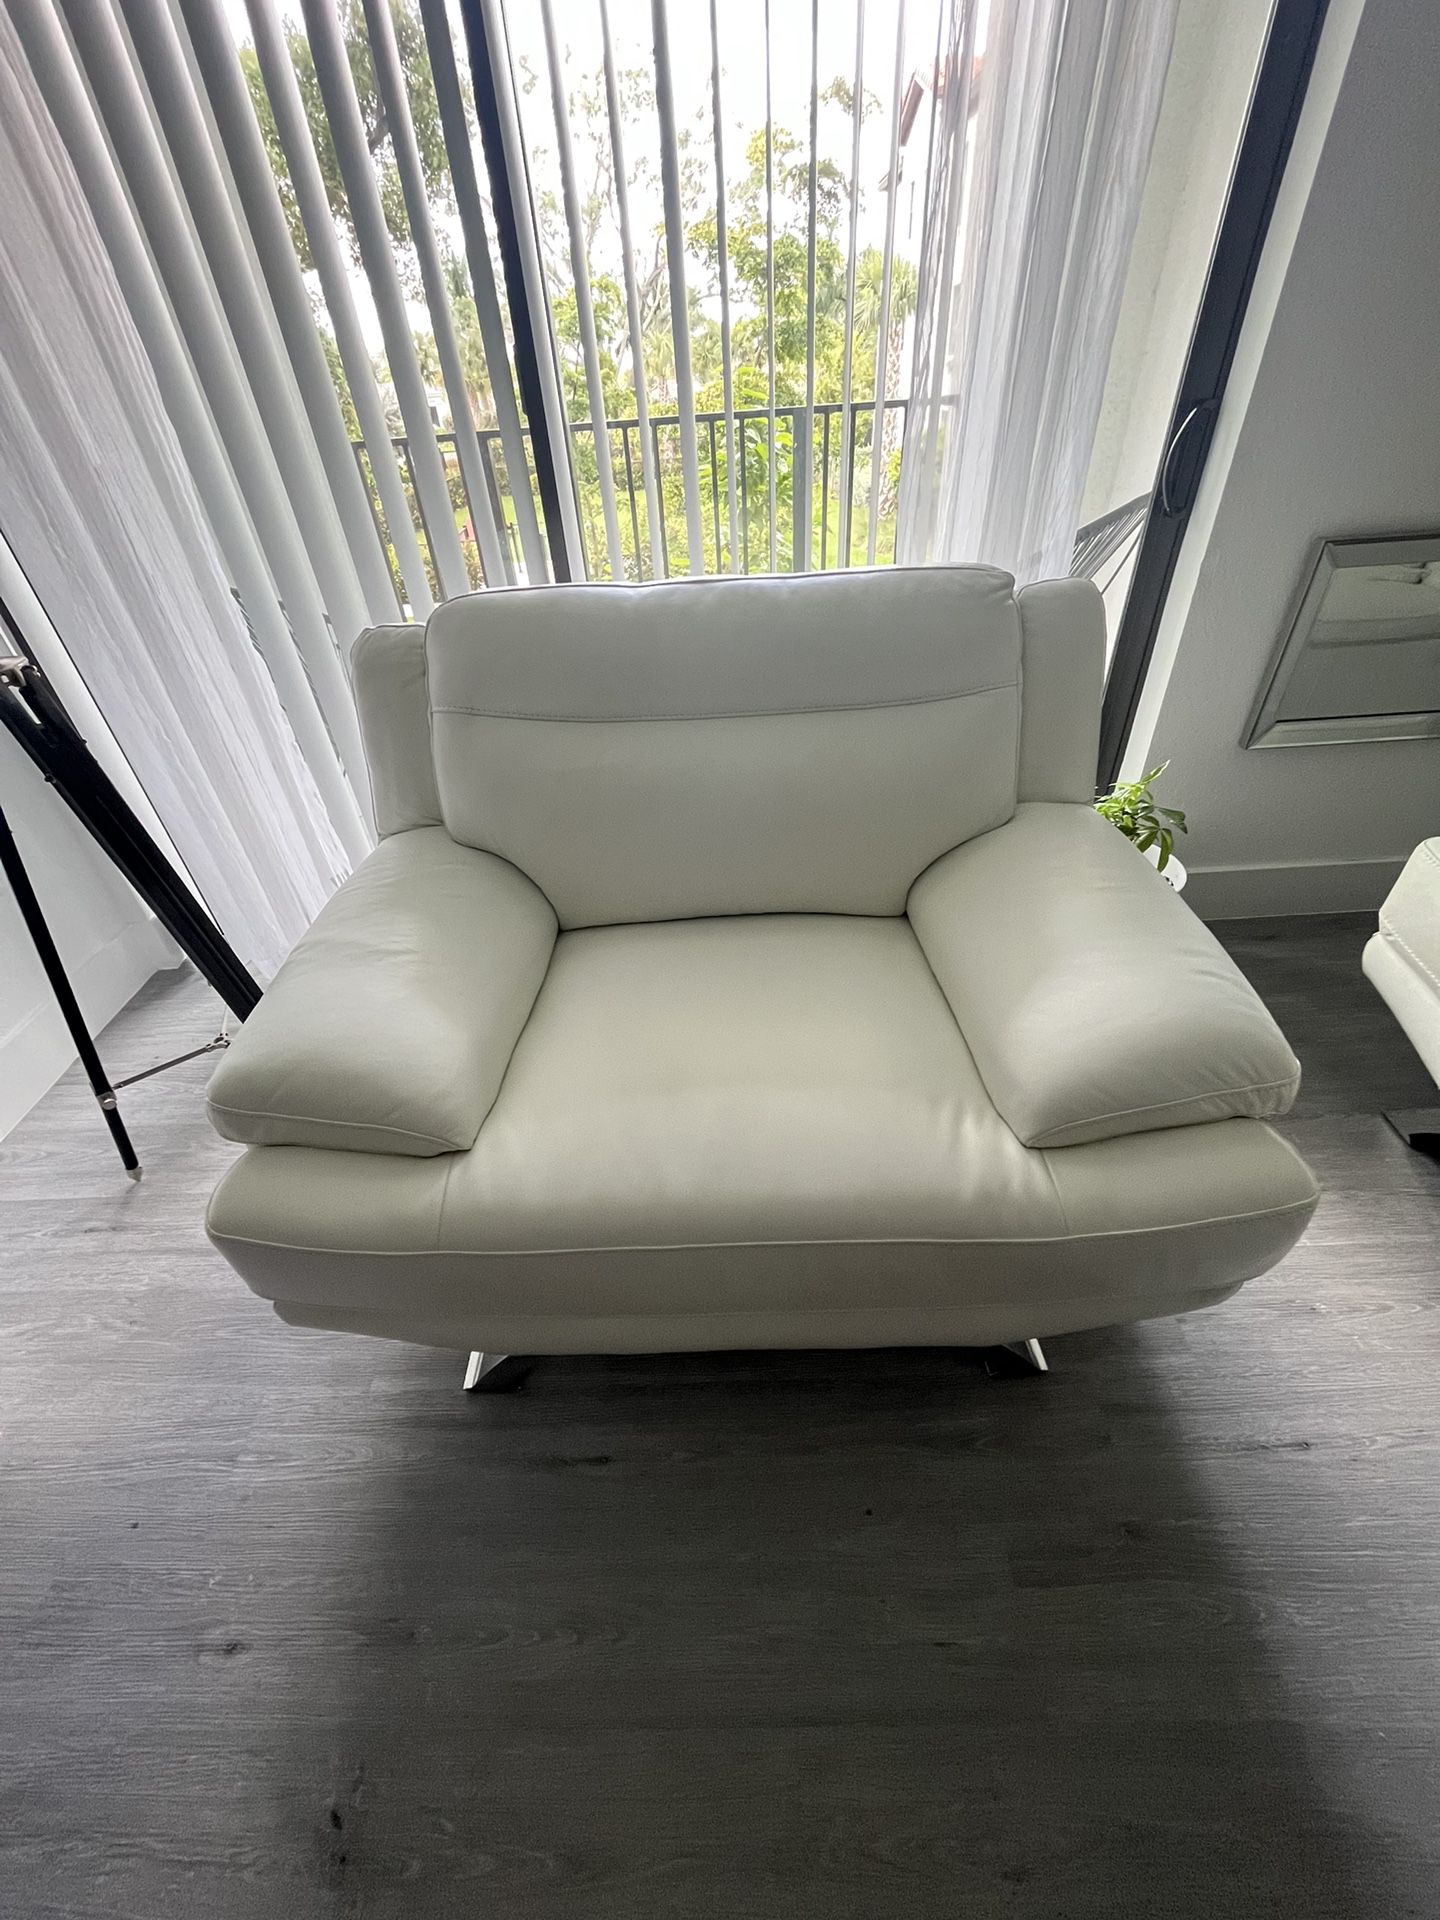 White Leather Oversized Chair